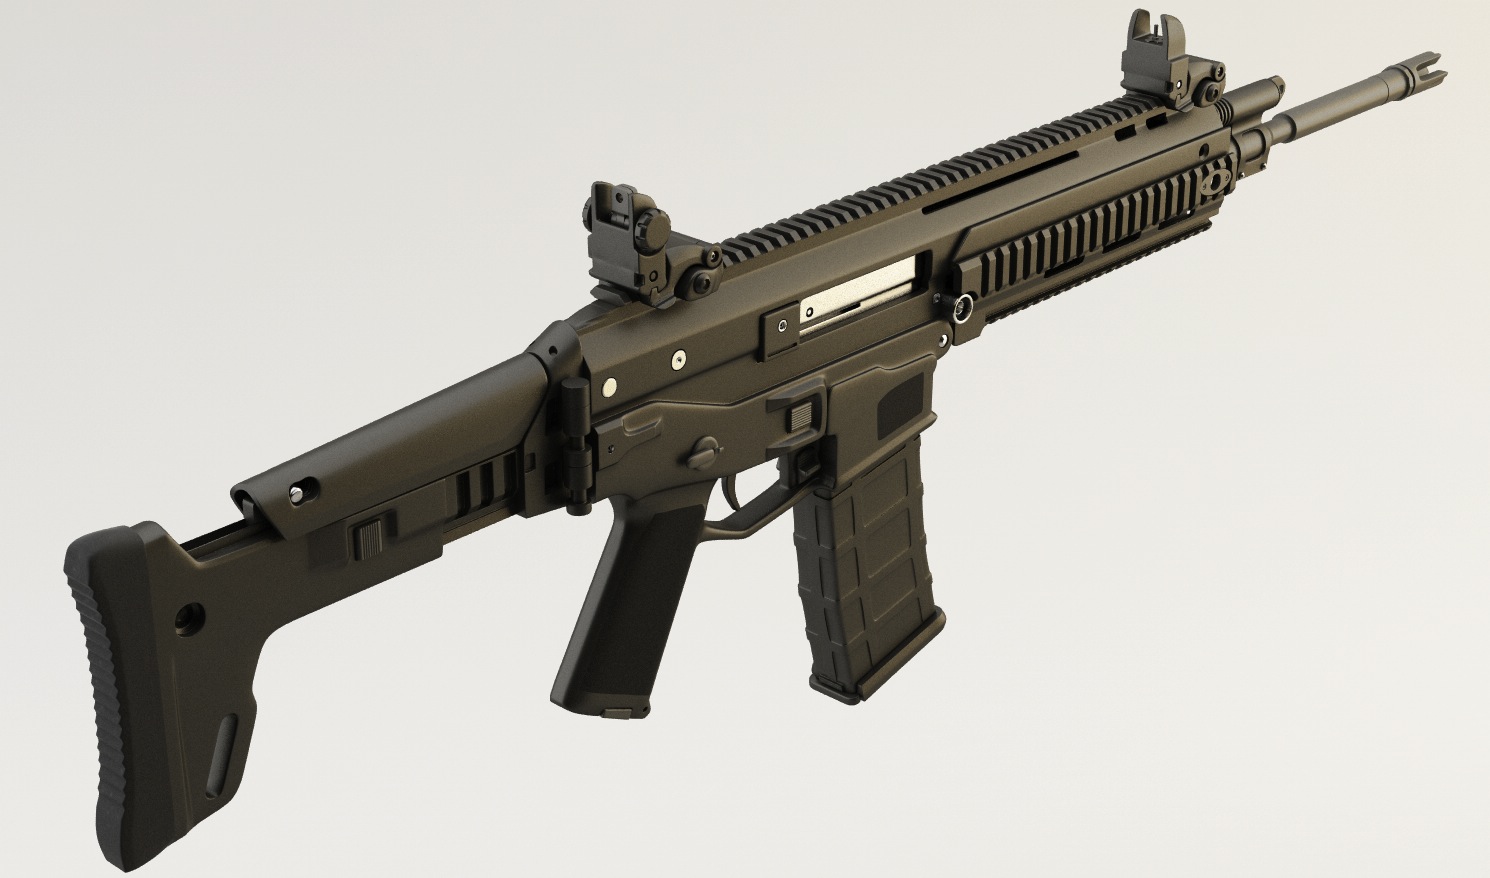 Alfa Img Showing Us Army Assault Rifle